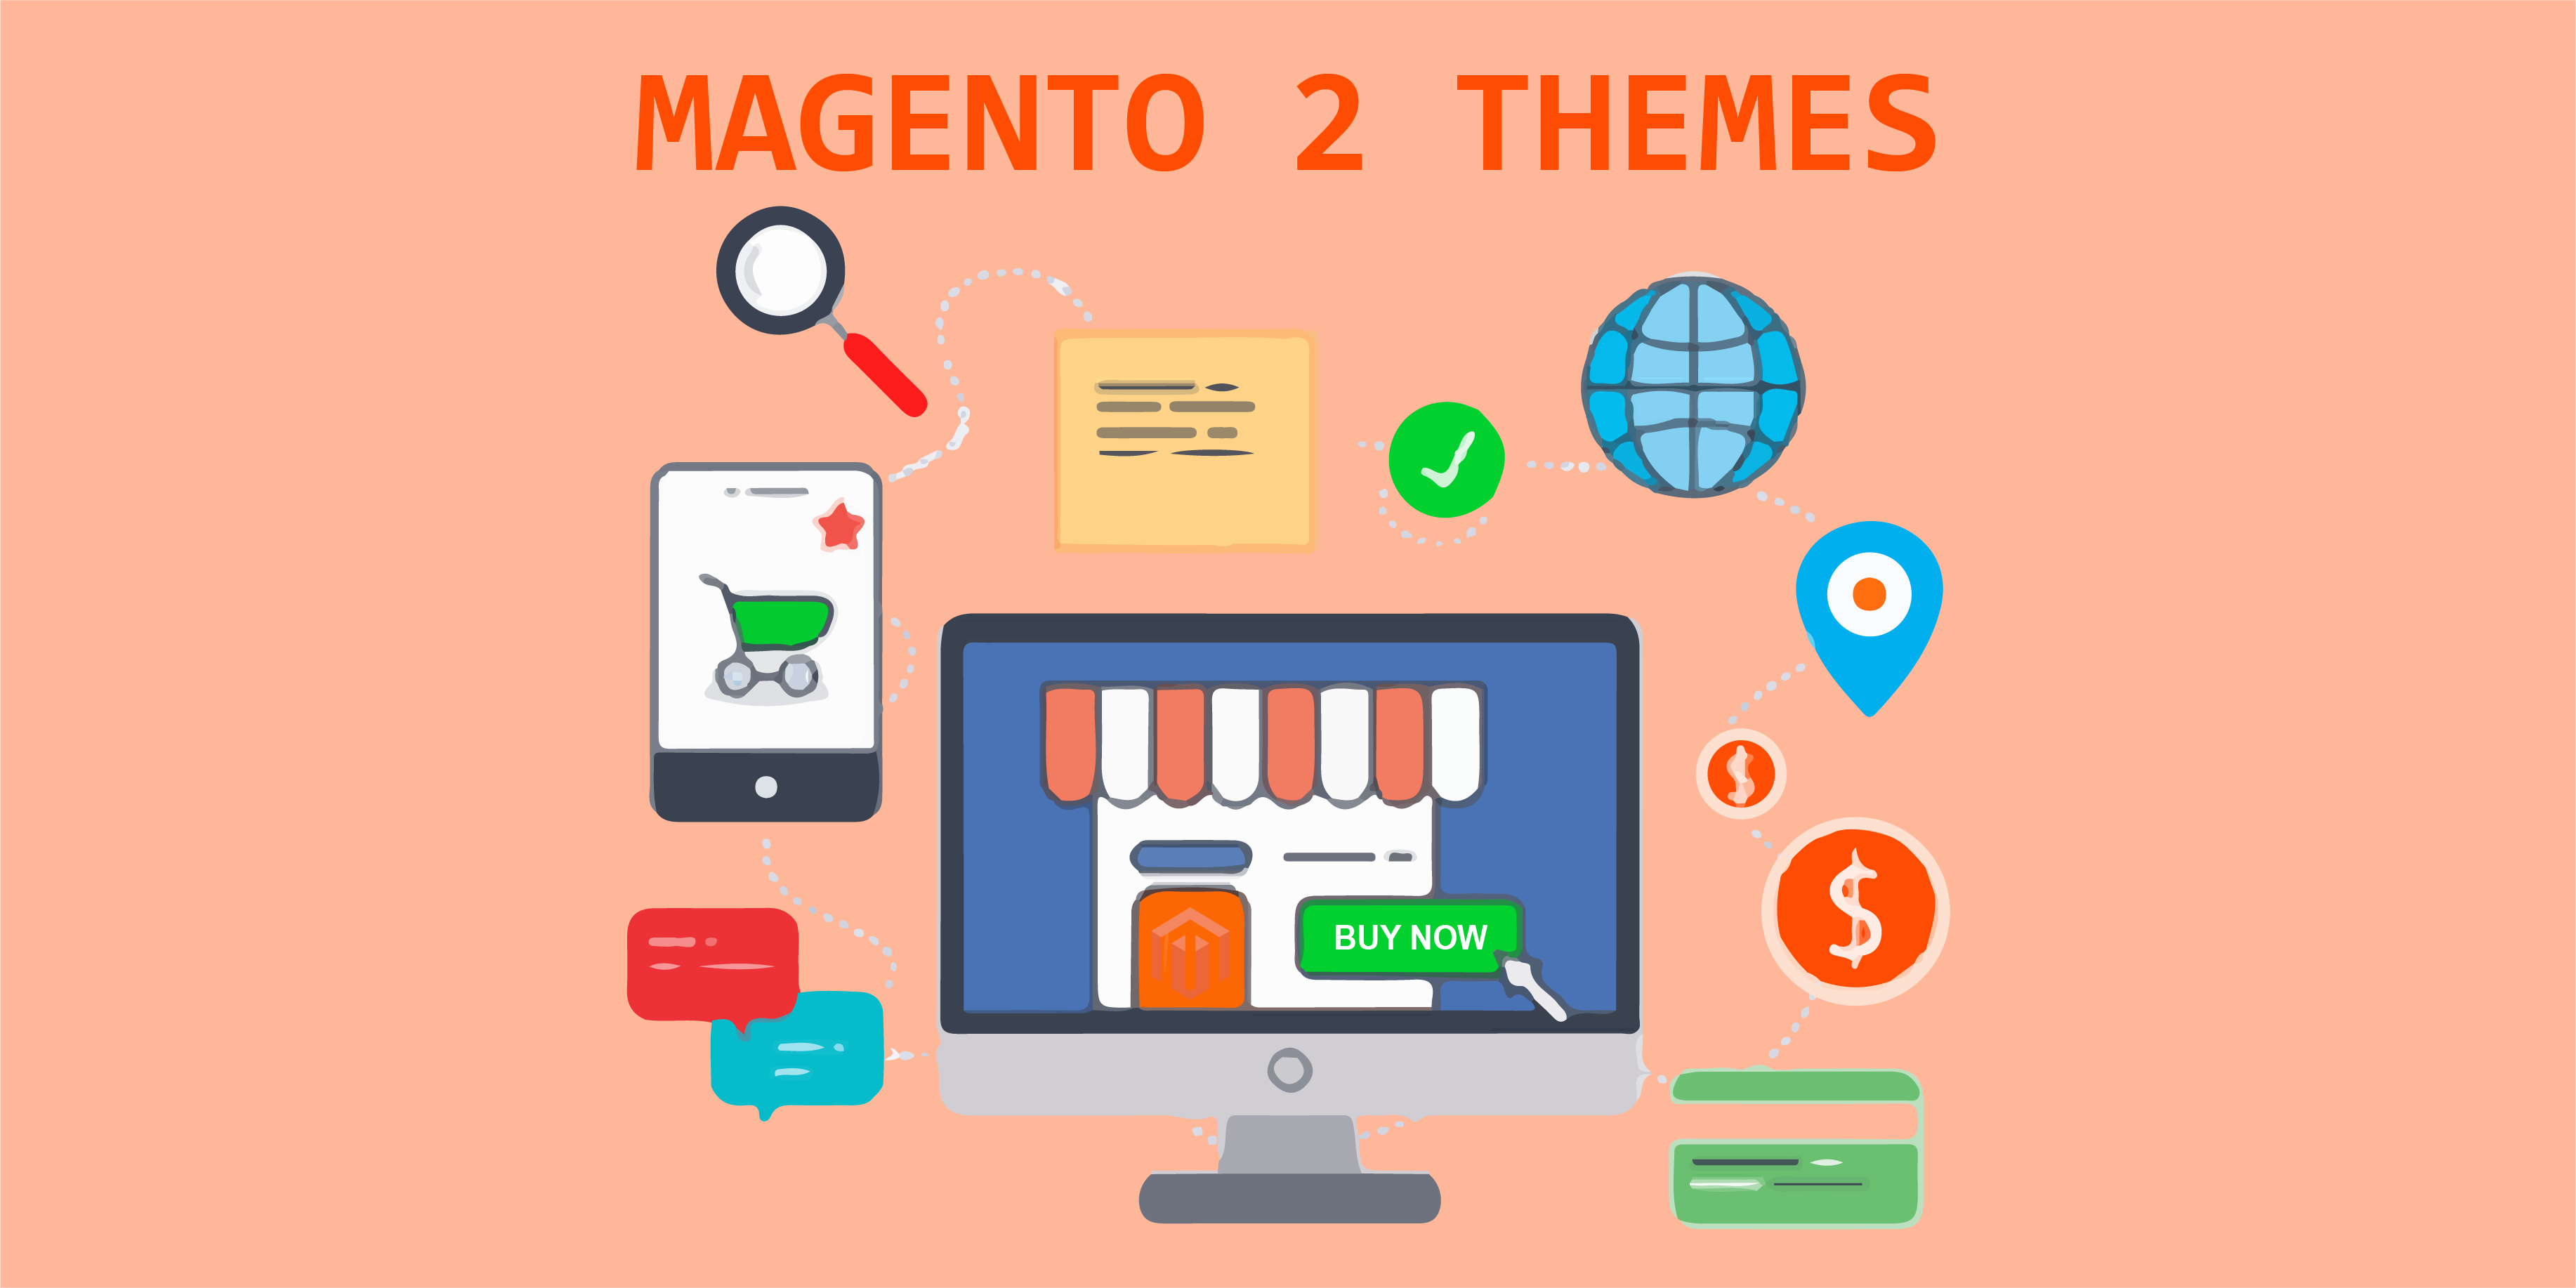 must-know-how-to-install-magento-2-theme-manual-tutorial